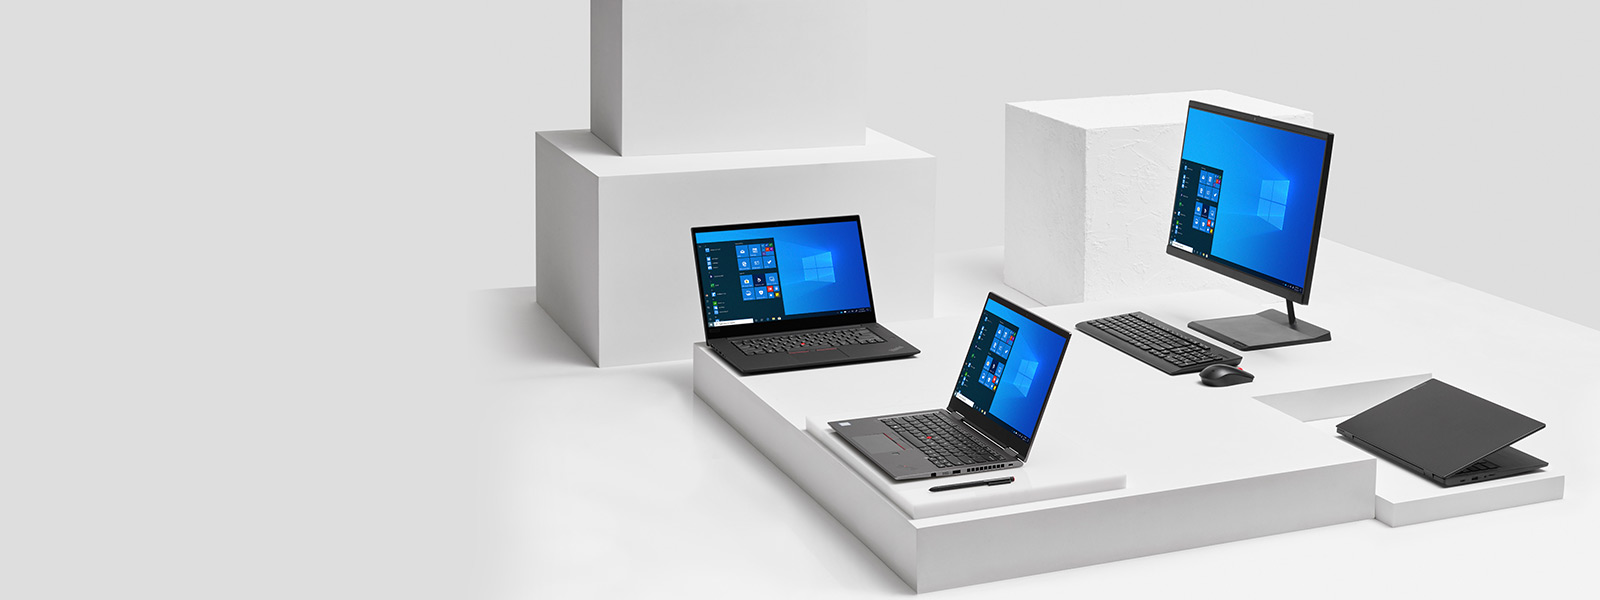 Lenovo family of devices with Windows 10 Pro start screens